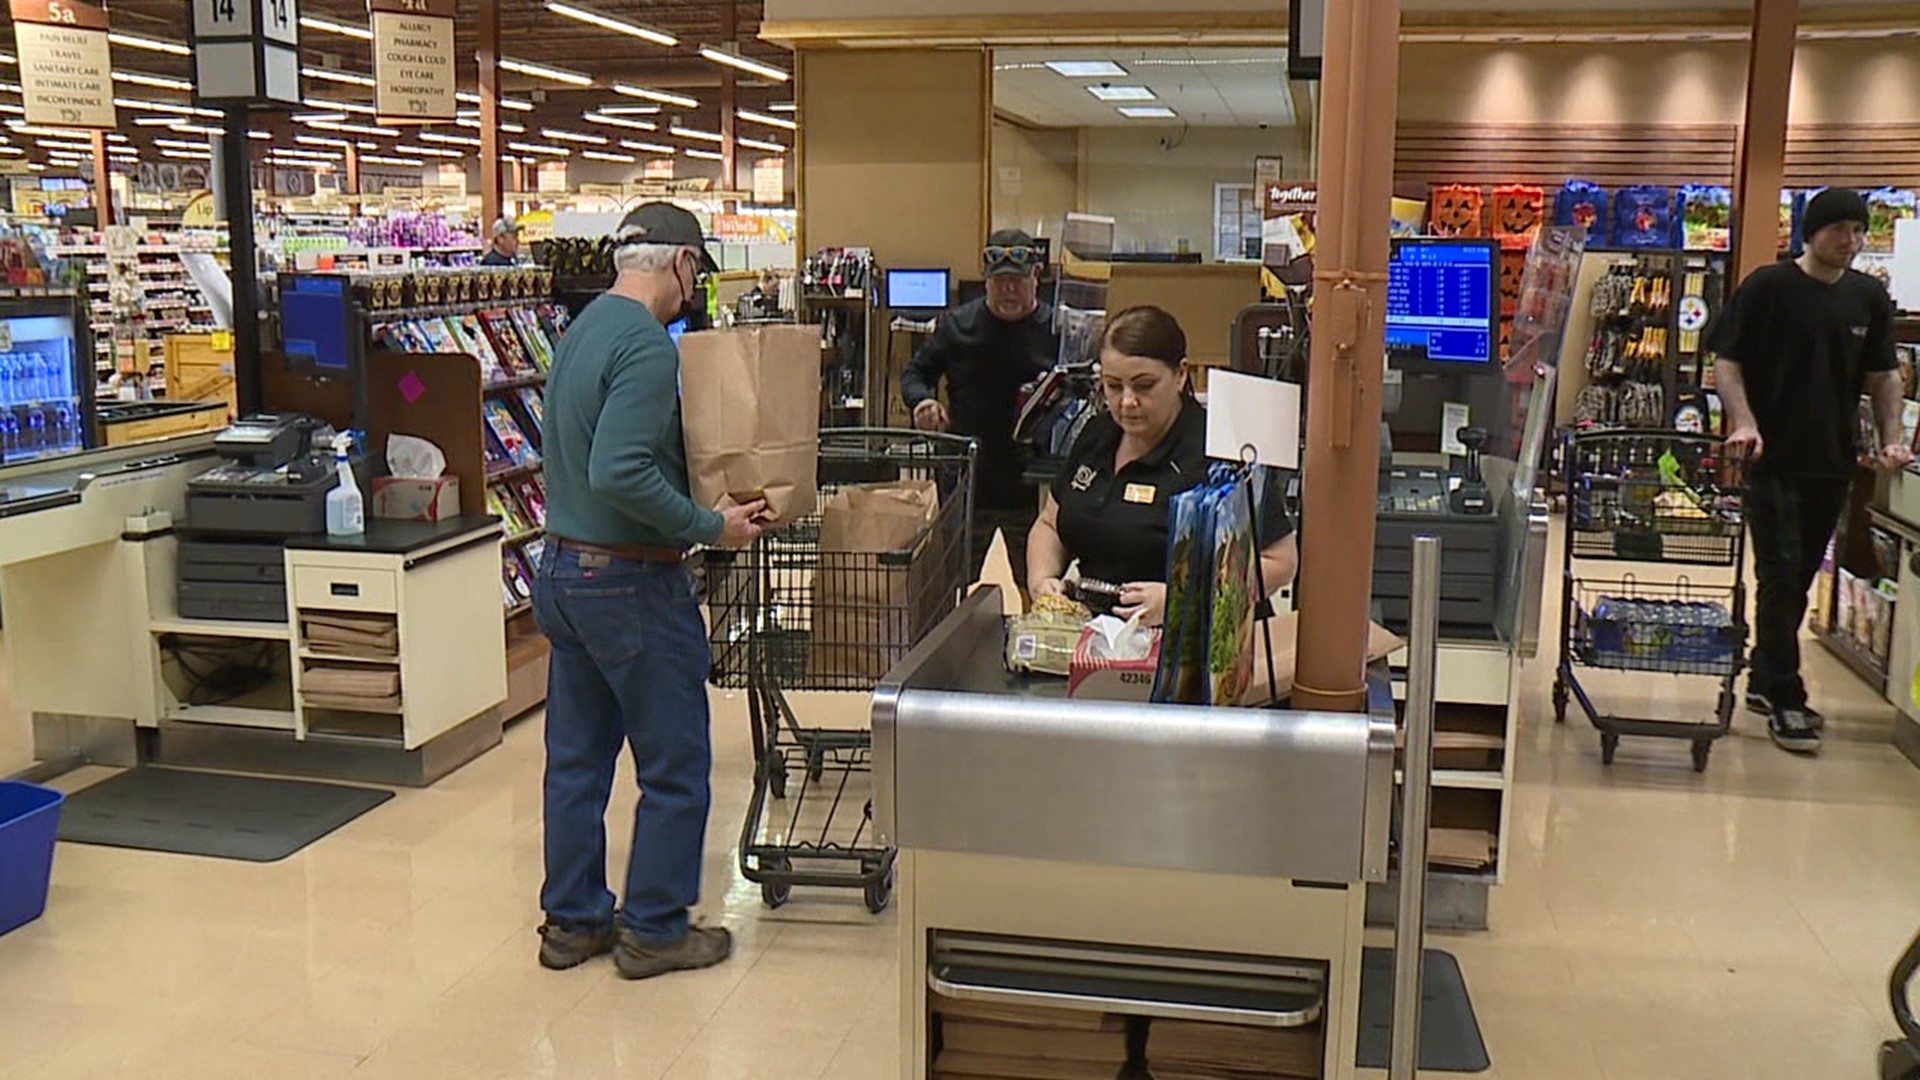 Shoppers could purchase reusable bags for 99 cents or paper bags for a nickel a piece.